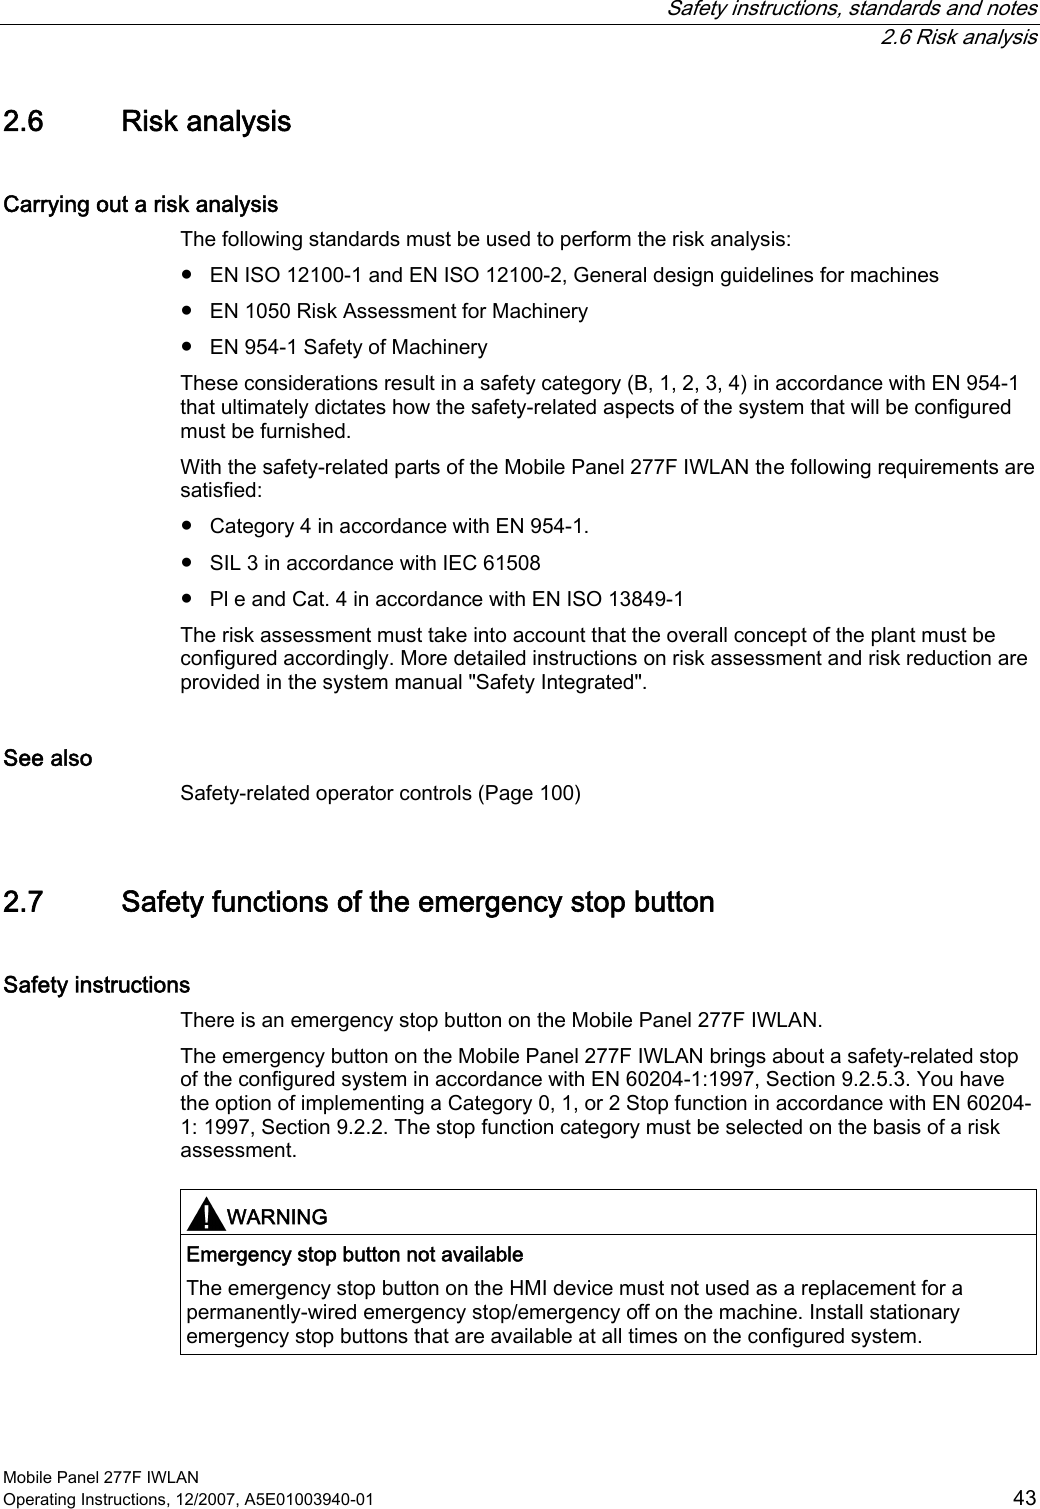   Safety instructions, standards and notes  2.6 Risk analysis Mobile Panel 277F IWLAN Operating Instructions, 12/2007, A5E01003940-01  43 2.6 Risk analysis Carrying out a risk analysis The following standards must be used to perform the risk analysis: ●  EN ISO 12100-1 and EN ISO 12100-2, General design guidelines for machines ●  EN 1050 Risk Assessment for Machinery ●  EN 954-1 Safety of Machinery These considerations result in a safety category (B, 1, 2, 3, 4) in accordance with EN 954-1 that ultimately dictates how the safety-related aspects of the system that will be configured must be furnished. With the safety-related parts of the Mobile Panel 277F IWLAN the following requirements are satisfied: ●  Category 4 in accordance with EN 954-1. ●  SIL 3 in accordance with IEC 61508 ●  Pl e and Cat. 4 in accordance with EN ISO 13849-1 The risk assessment must take into account that the overall concept of the plant must be configured accordingly. More detailed instructions on risk assessment and risk reduction are provided in the system manual &quot;Safety Integrated&quot;. See also Safety-related operator controls (Page 100) 2.7 Safety functions of the emergency stop button Safety instructions There is an emergency stop button on the Mobile Panel 277F IWLAN.  The emergency button on the Mobile Panel 277F IWLAN brings about a safety-related stop of the configured system in accordance with EN 60204-1:1997, Section 9.2.5.3. You have the option of implementing a Category 0, 1, or 2 Stop function in accordance with EN 60204-1: 1997, Section 9.2.2. The stop function category must be selected on the basis of a risk assessment.  WARNING  Emergency stop button not available The emergency stop button on the HMI device must not used as a replacement for a permanently-wired emergency stop/emergency off on the machine. Install stationary emergency stop buttons that are available at all times on the configured system.  